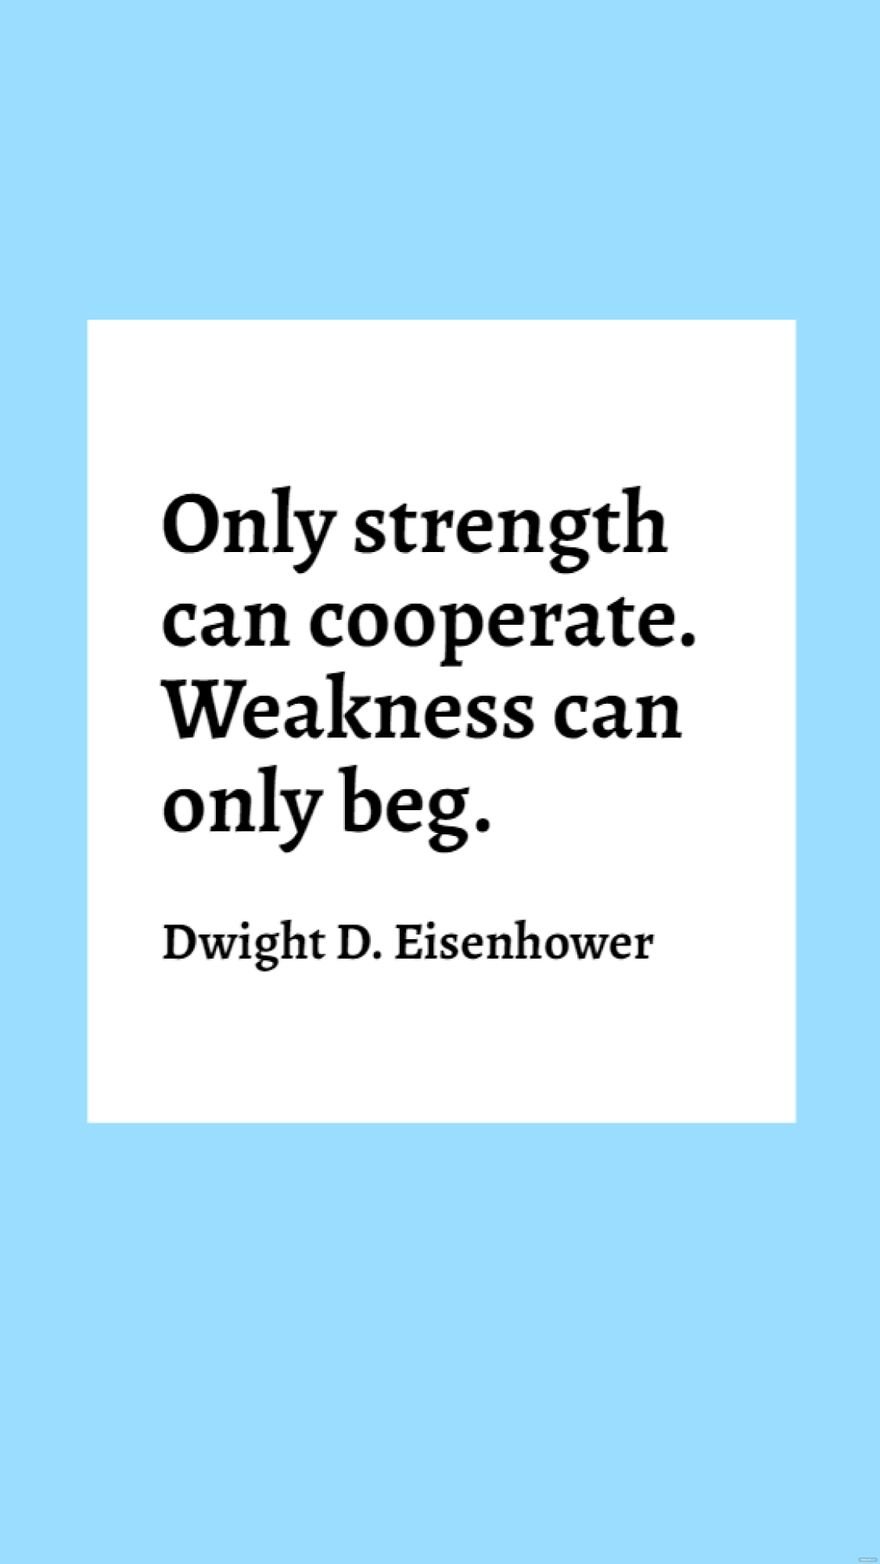 Dwight D. Eisenhower - Only strength can cooperate. Weakness can only beg.